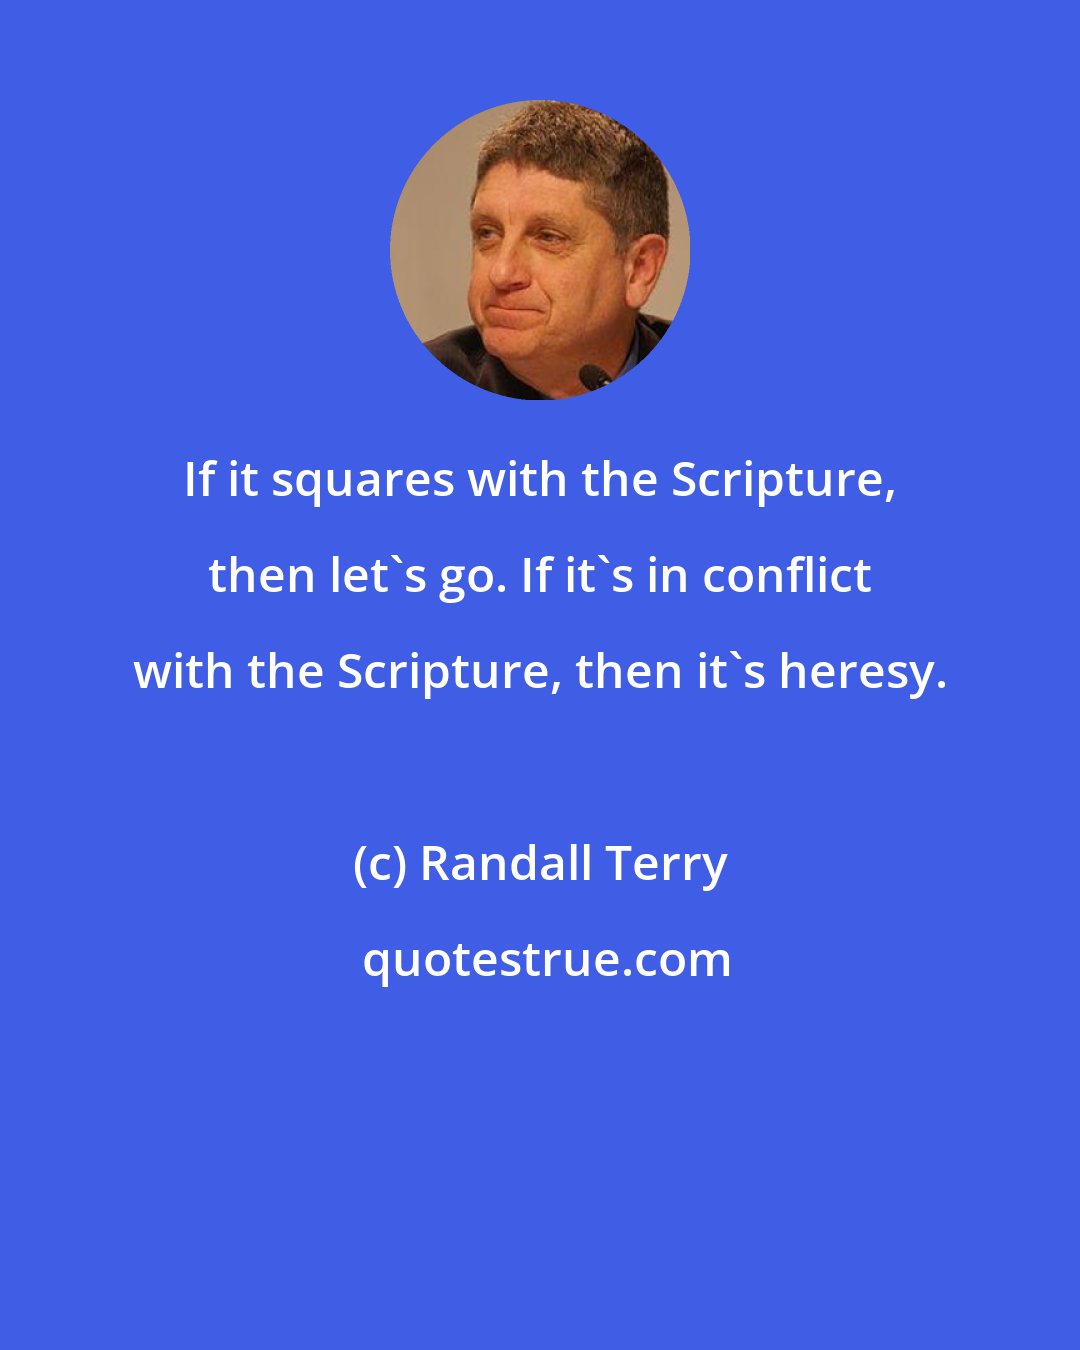 Randall Terry: If it squares with the Scripture, then let's go. If it's in conflict with the Scripture, then it's heresy.